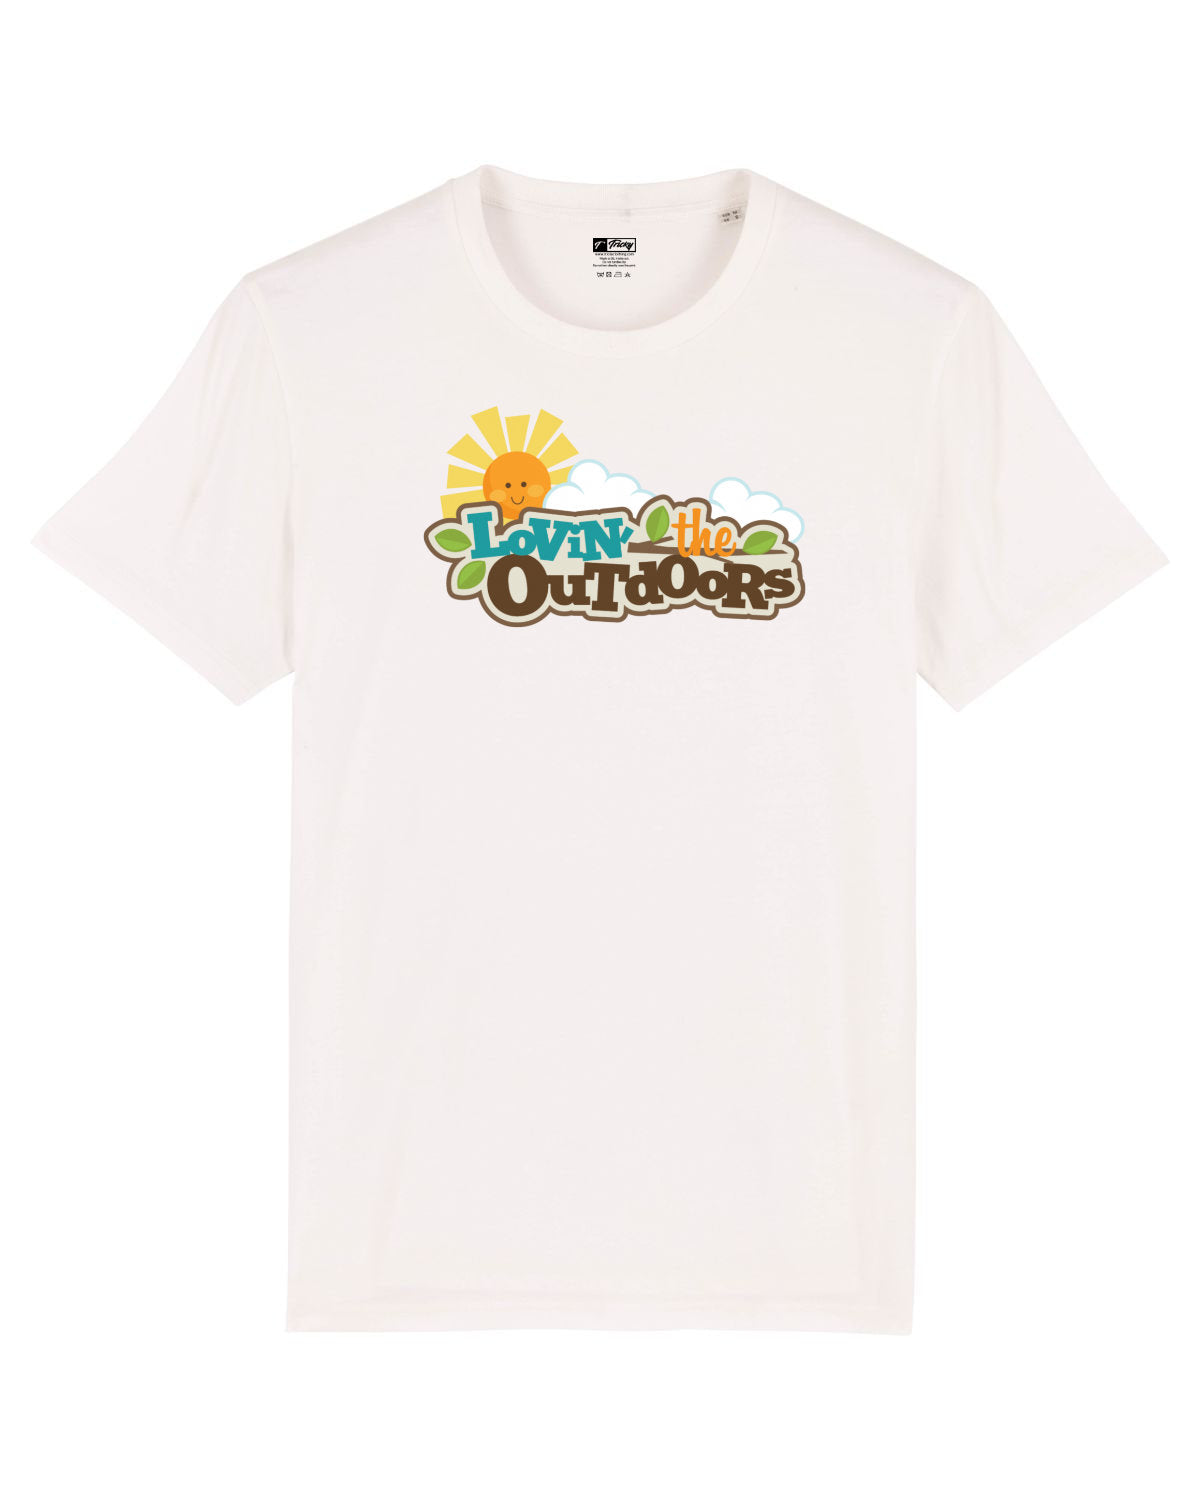 OUTDOORS T SHIRT VINTAGE WHITE